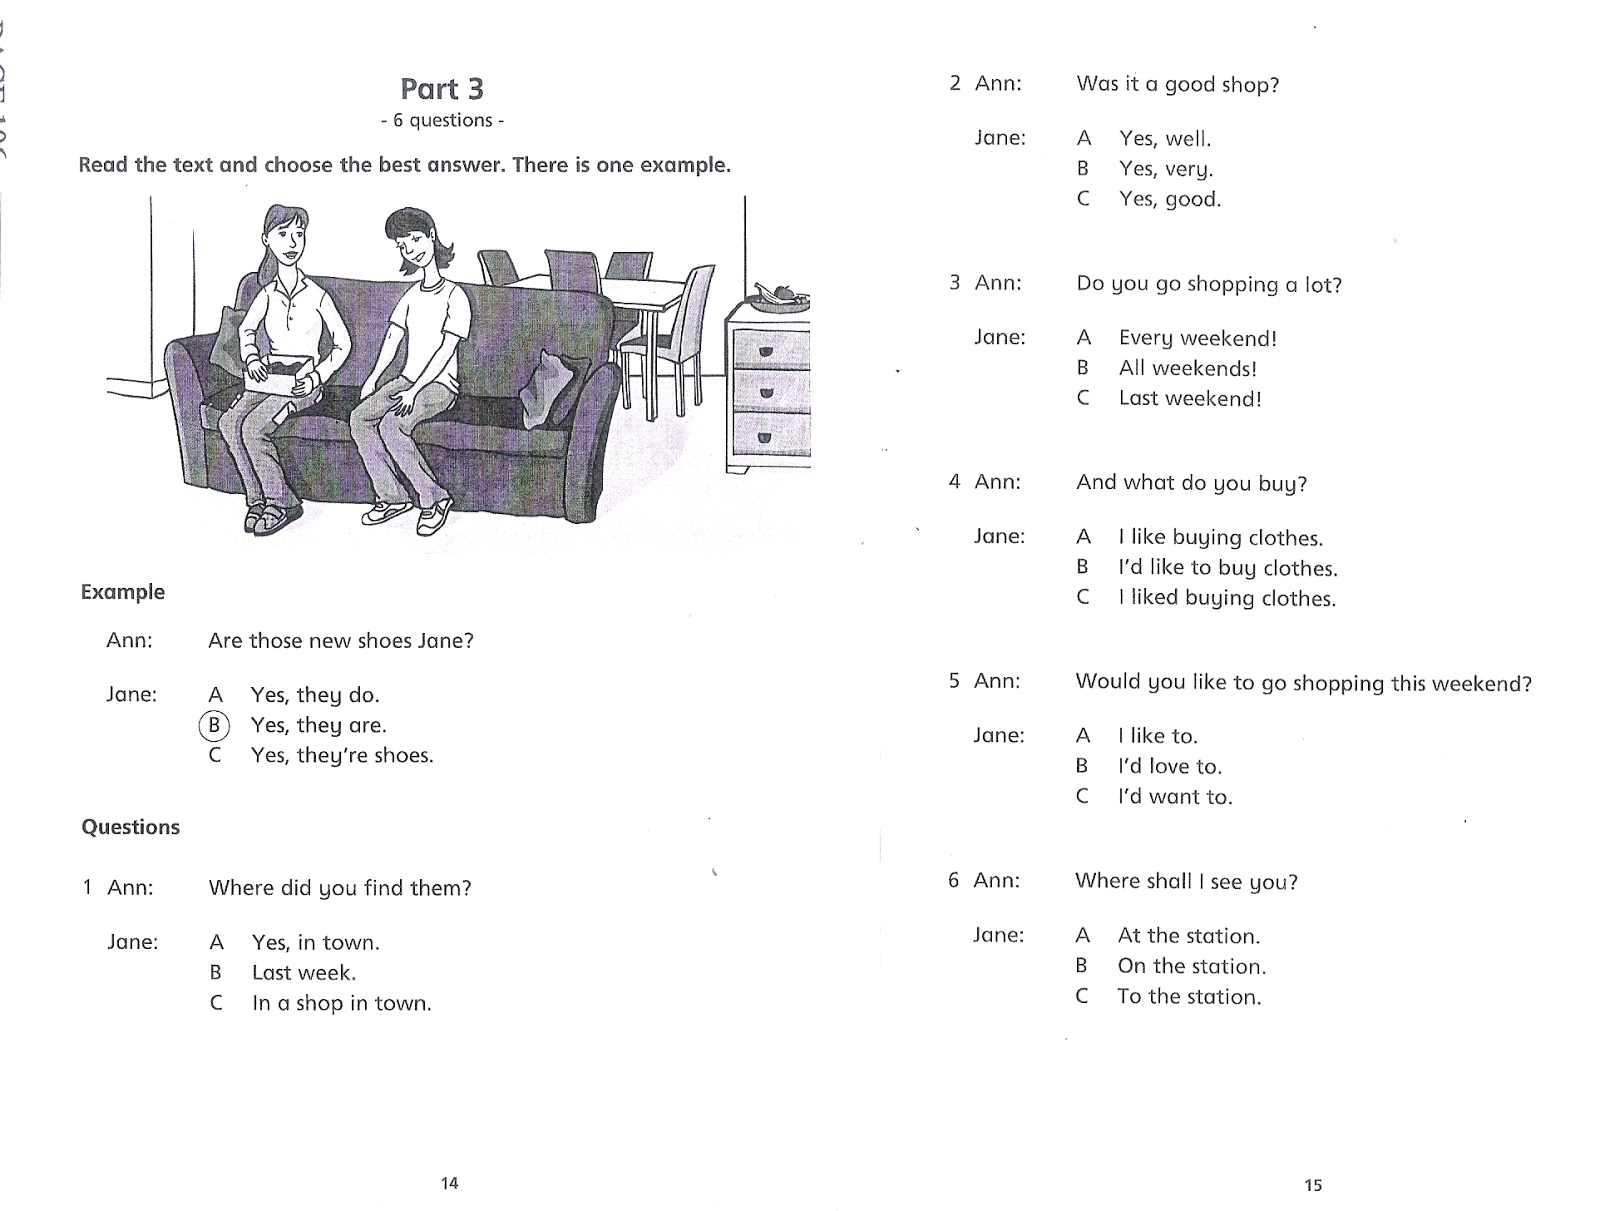 Reading and writing 4 answers. Movers reading and writing Part 1. Чтение текста Movers. Movers reading and writing Test. Movers reading Part 5.